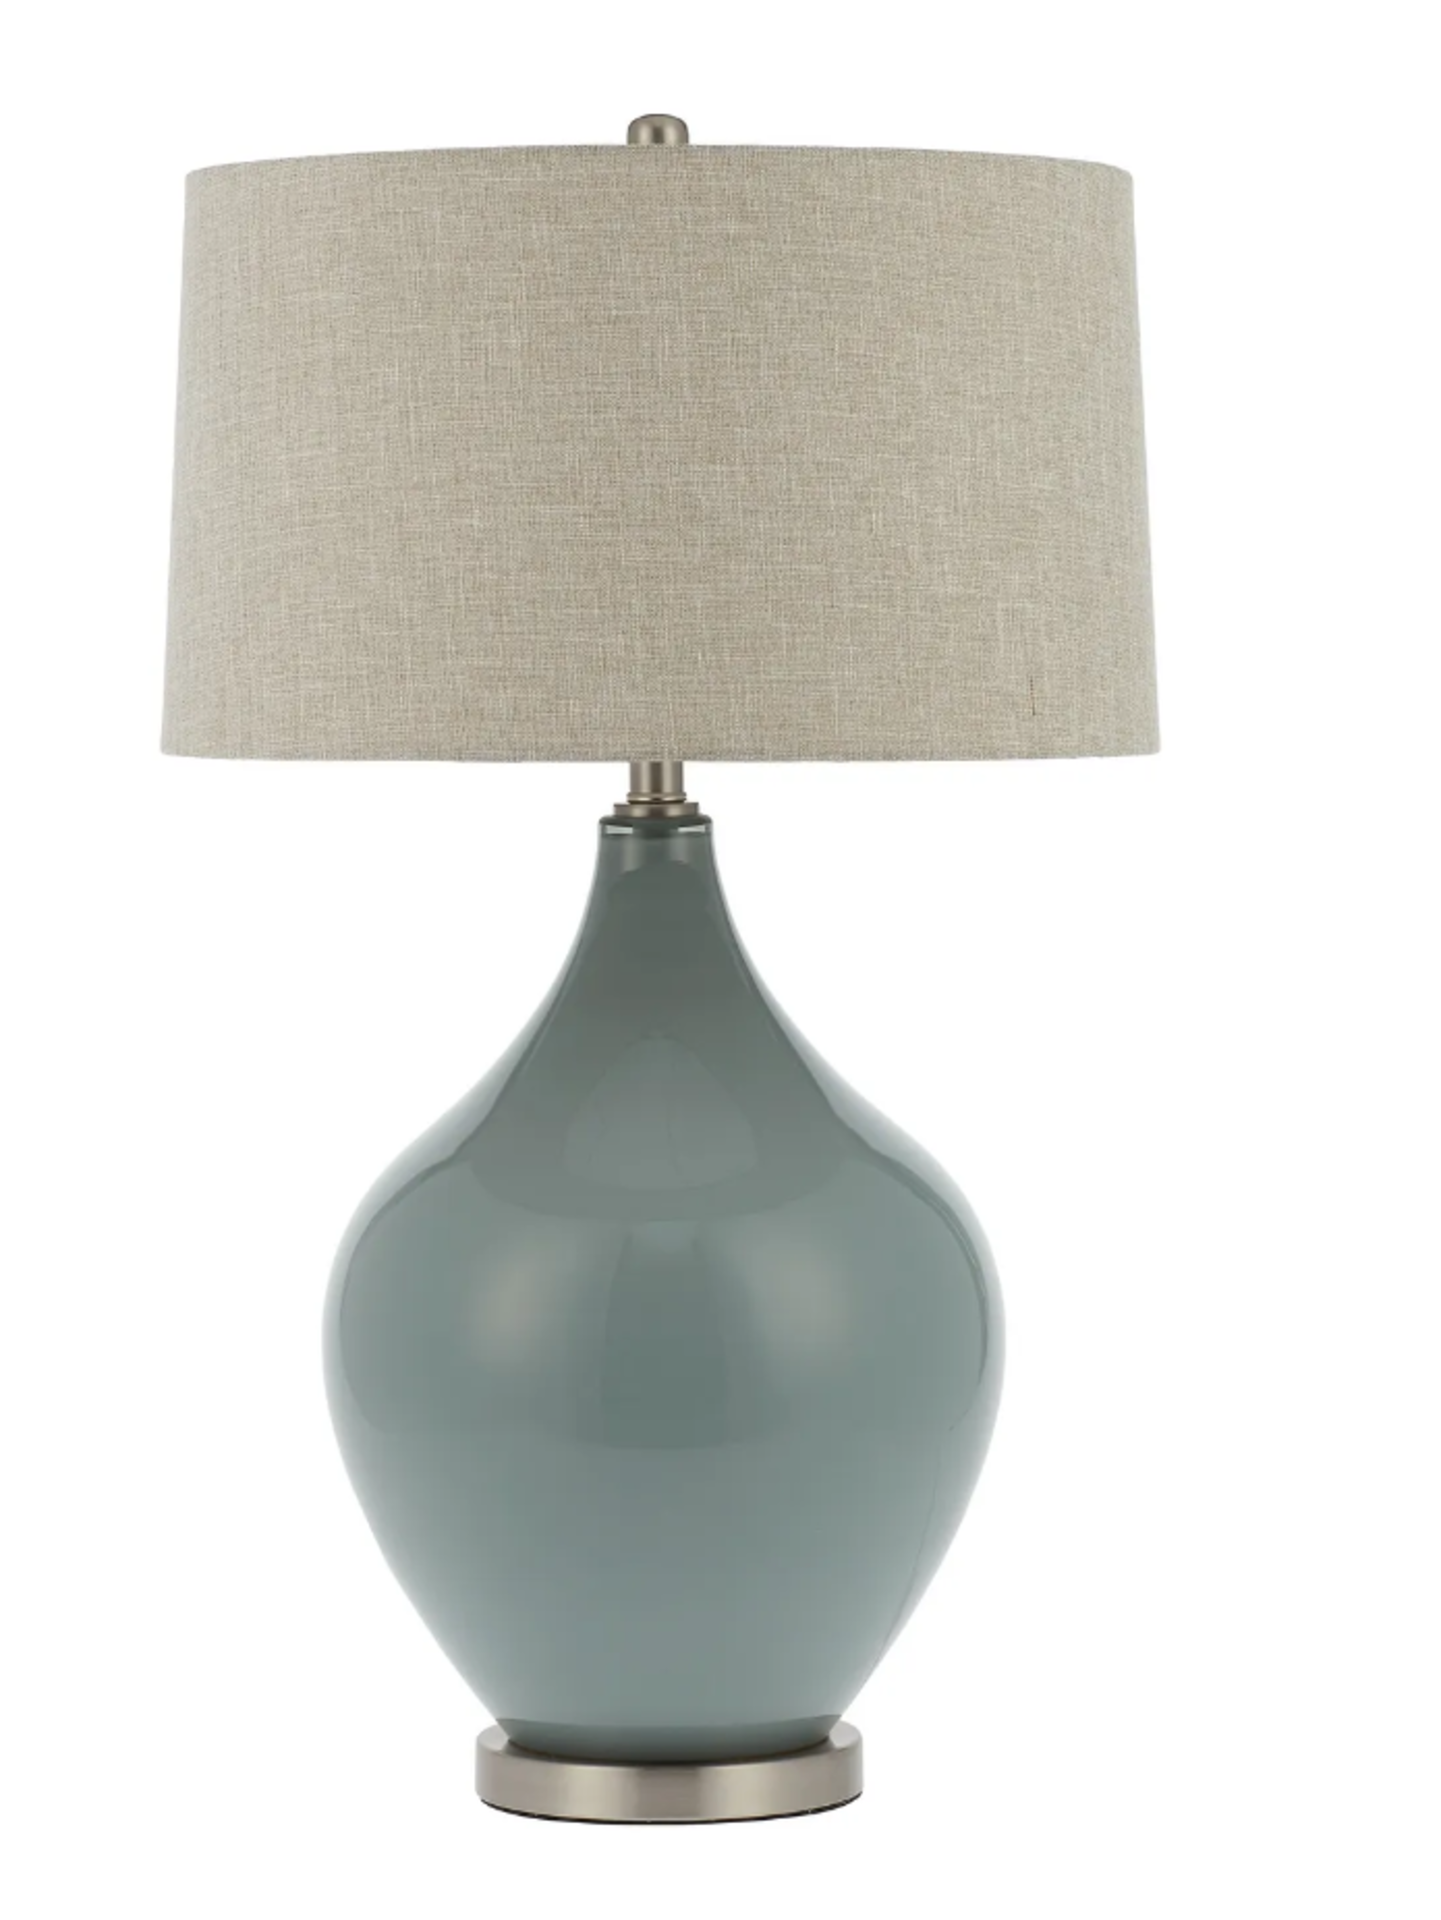 DORCHESTER TABLE LAMP Pale Blue Glass. RRP £229.99. A smooth, teardrop shape melts into a metal - Image 2 of 2